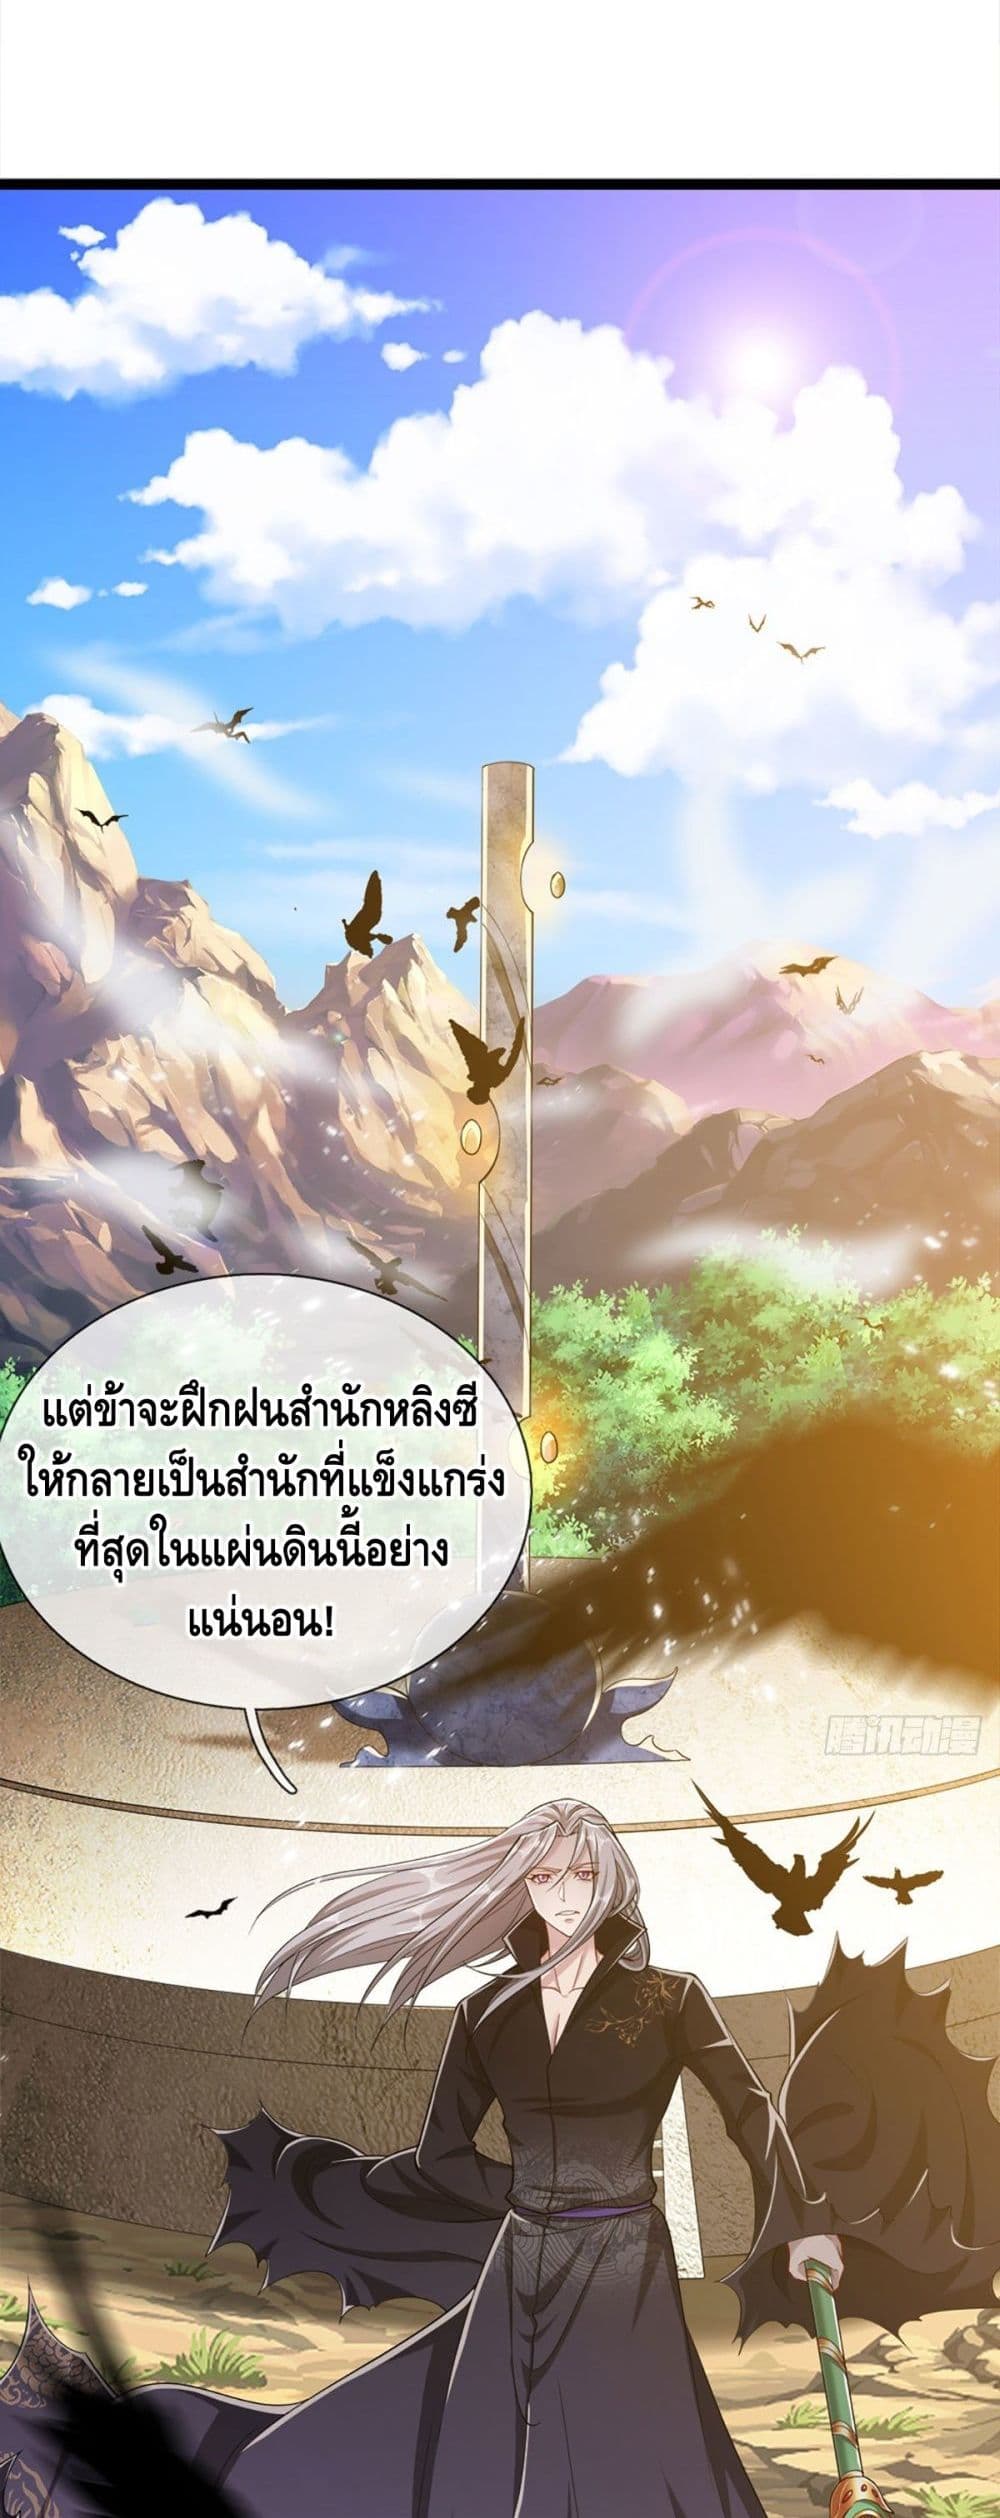 Disciples All Over the World à¸à¸­à¸à¸à¸µà¹ 29 (18)